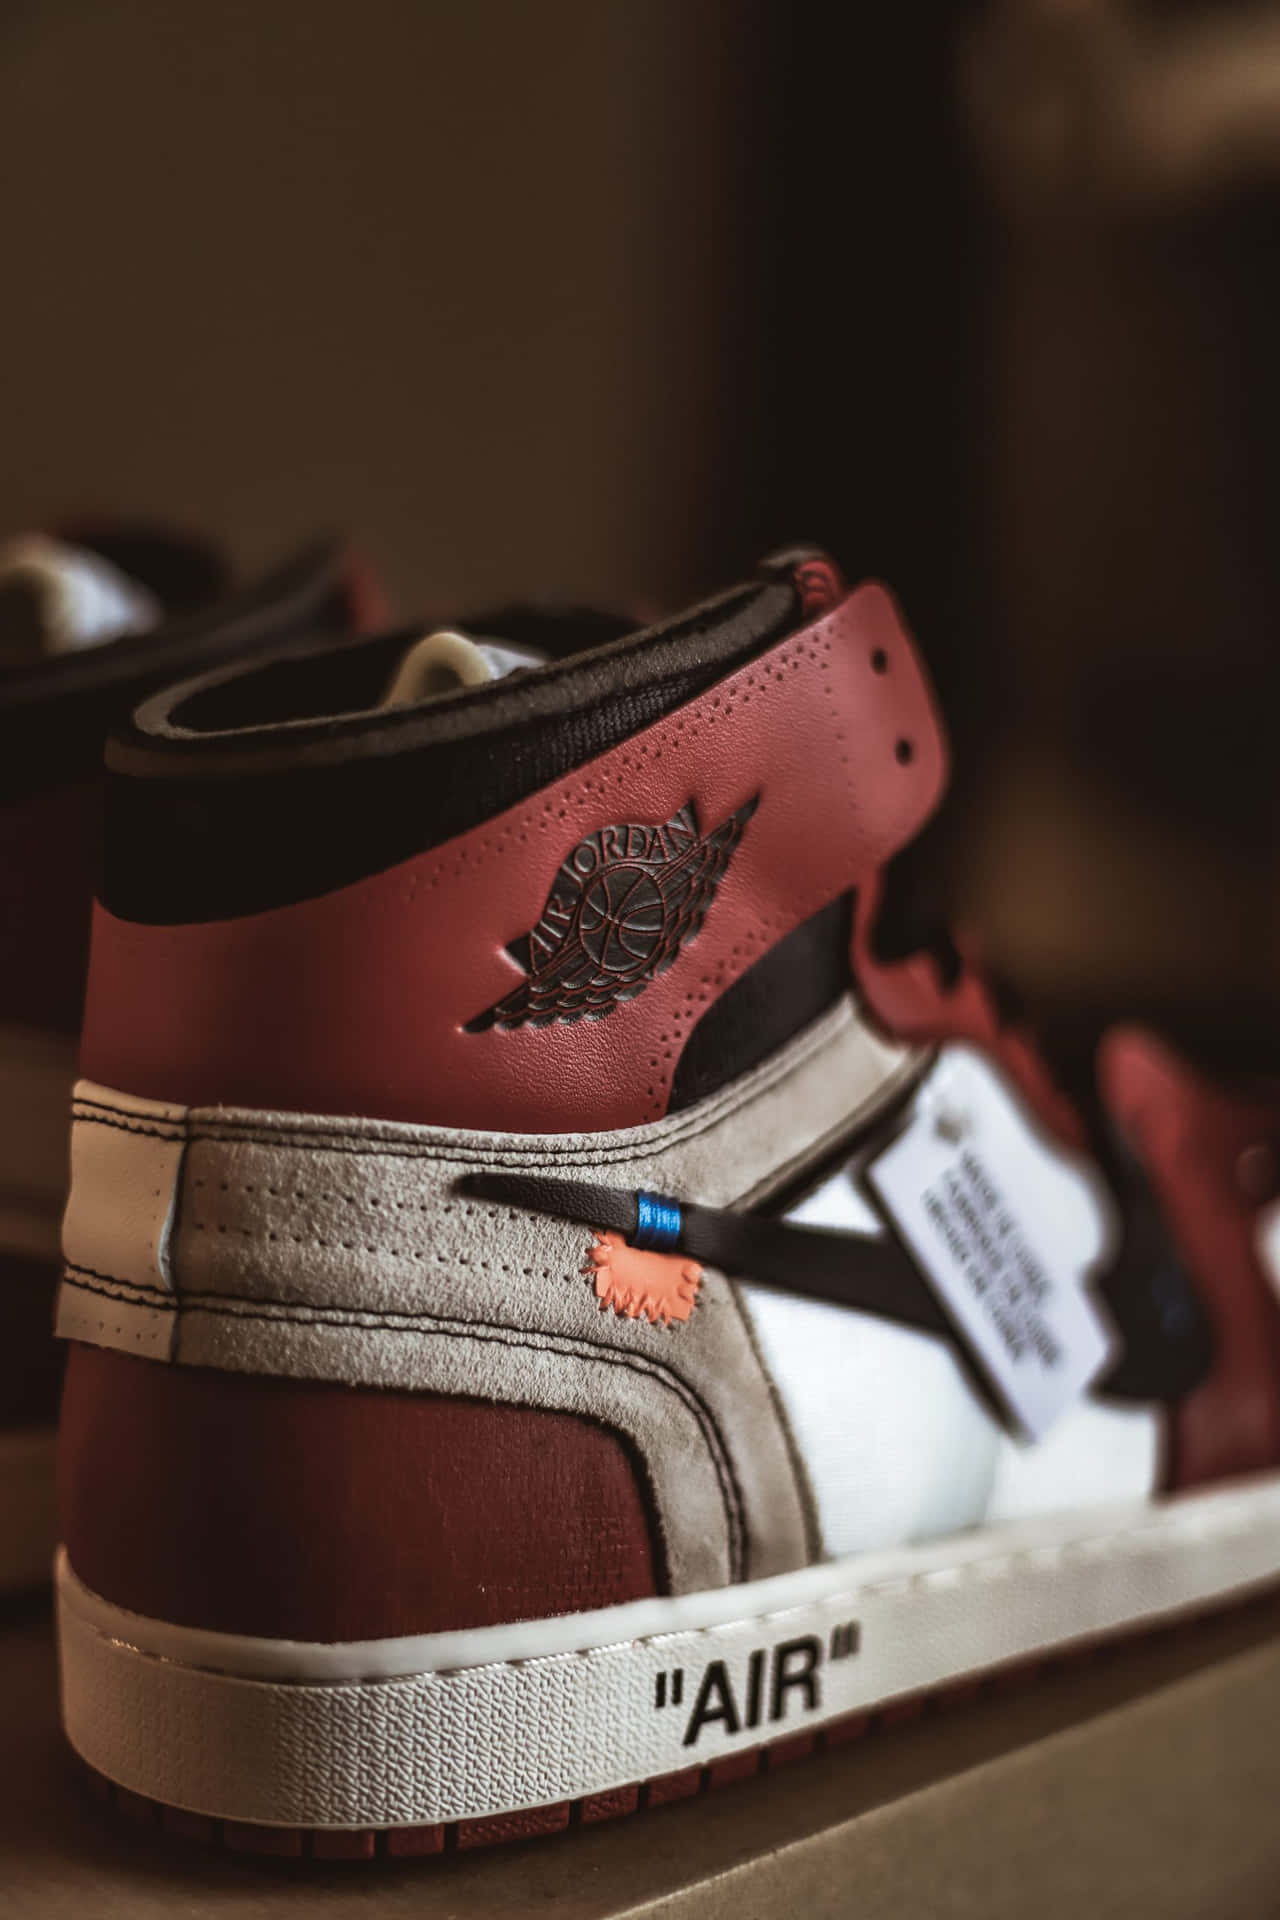 A Pair Of Air Jordan 1's With A Red And White Logo Wallpaper